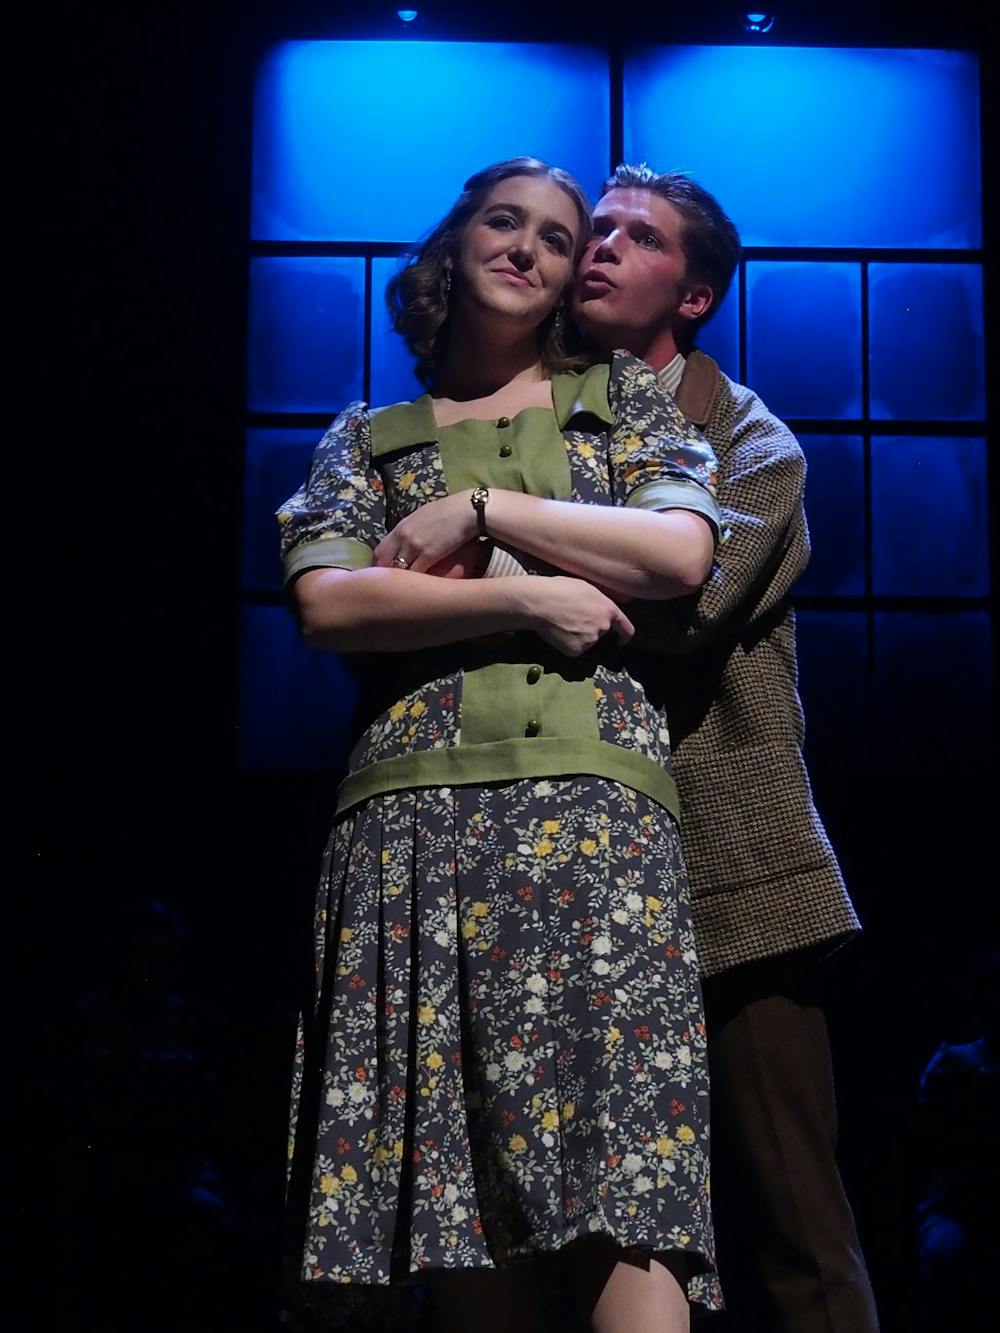 Catherine Donohue (played by junior Tammy Sanow) and her husband Tom (played by senior Drew Grant) embrace. These Shining Lives highlights Catherine and Tom's relationship as her health deteriorates after working for Radium Dial.